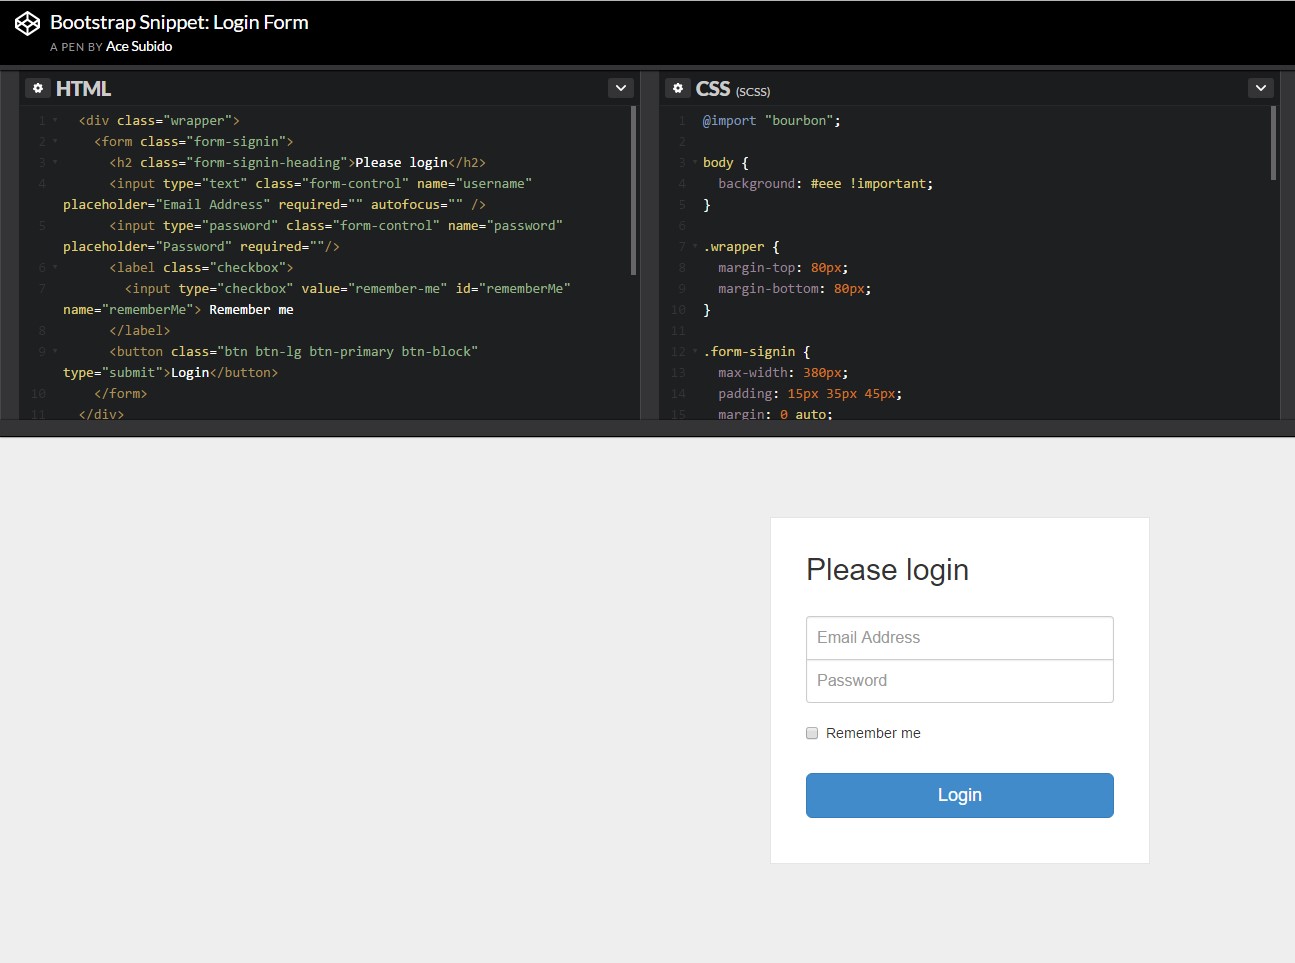  One more example of Bootstrap Login Form